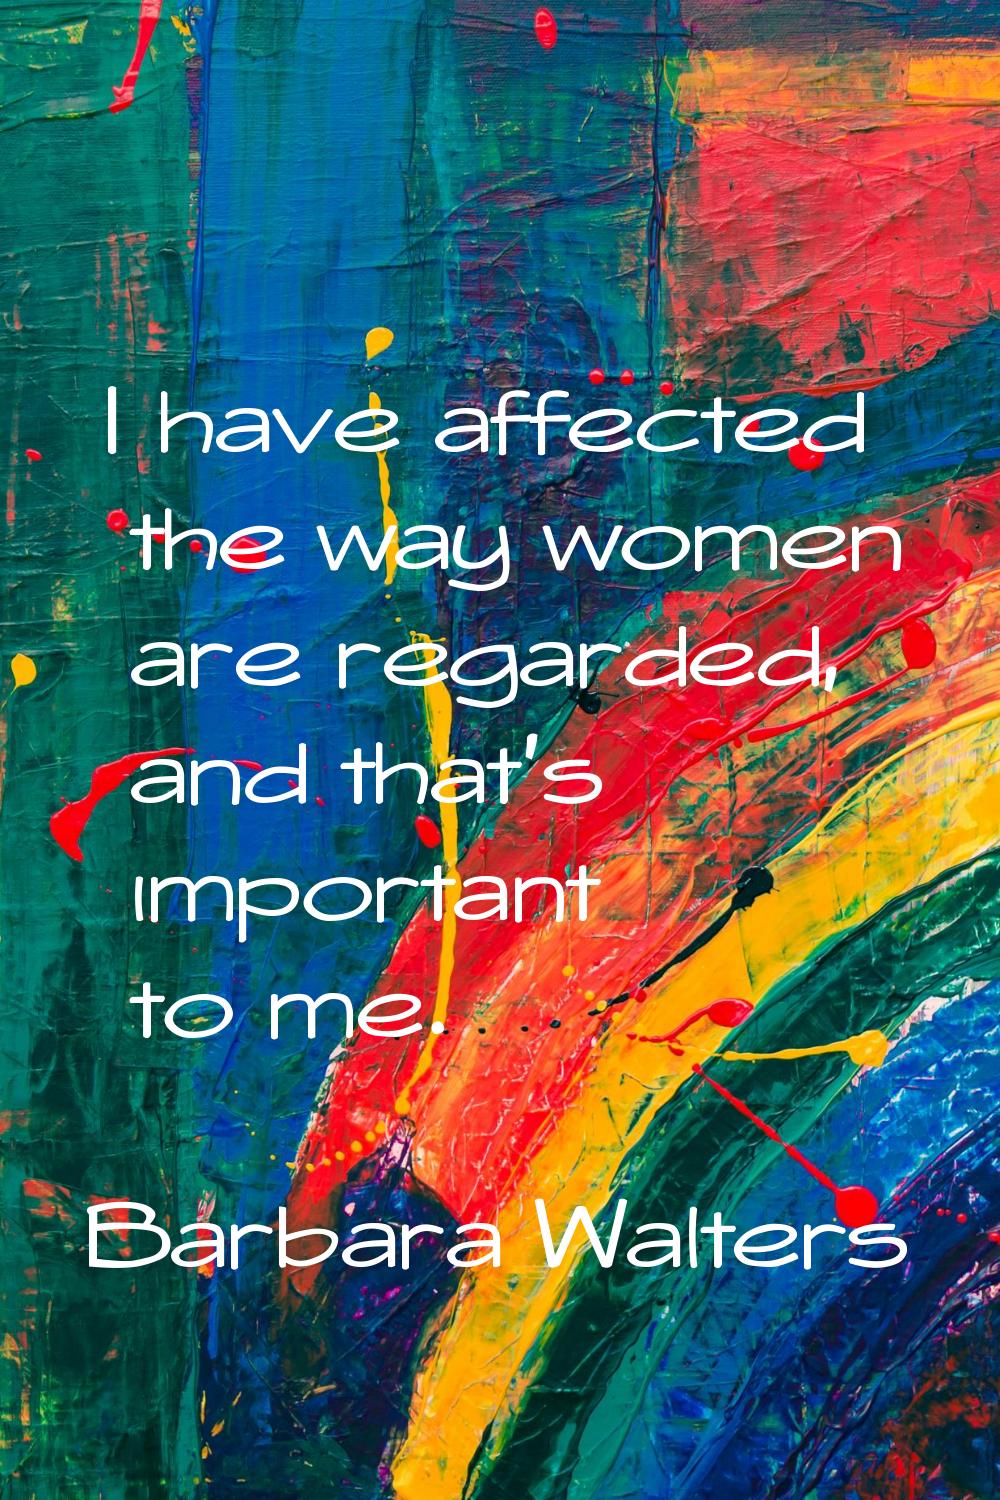 I have affected the way women are regarded, and that's important to me.